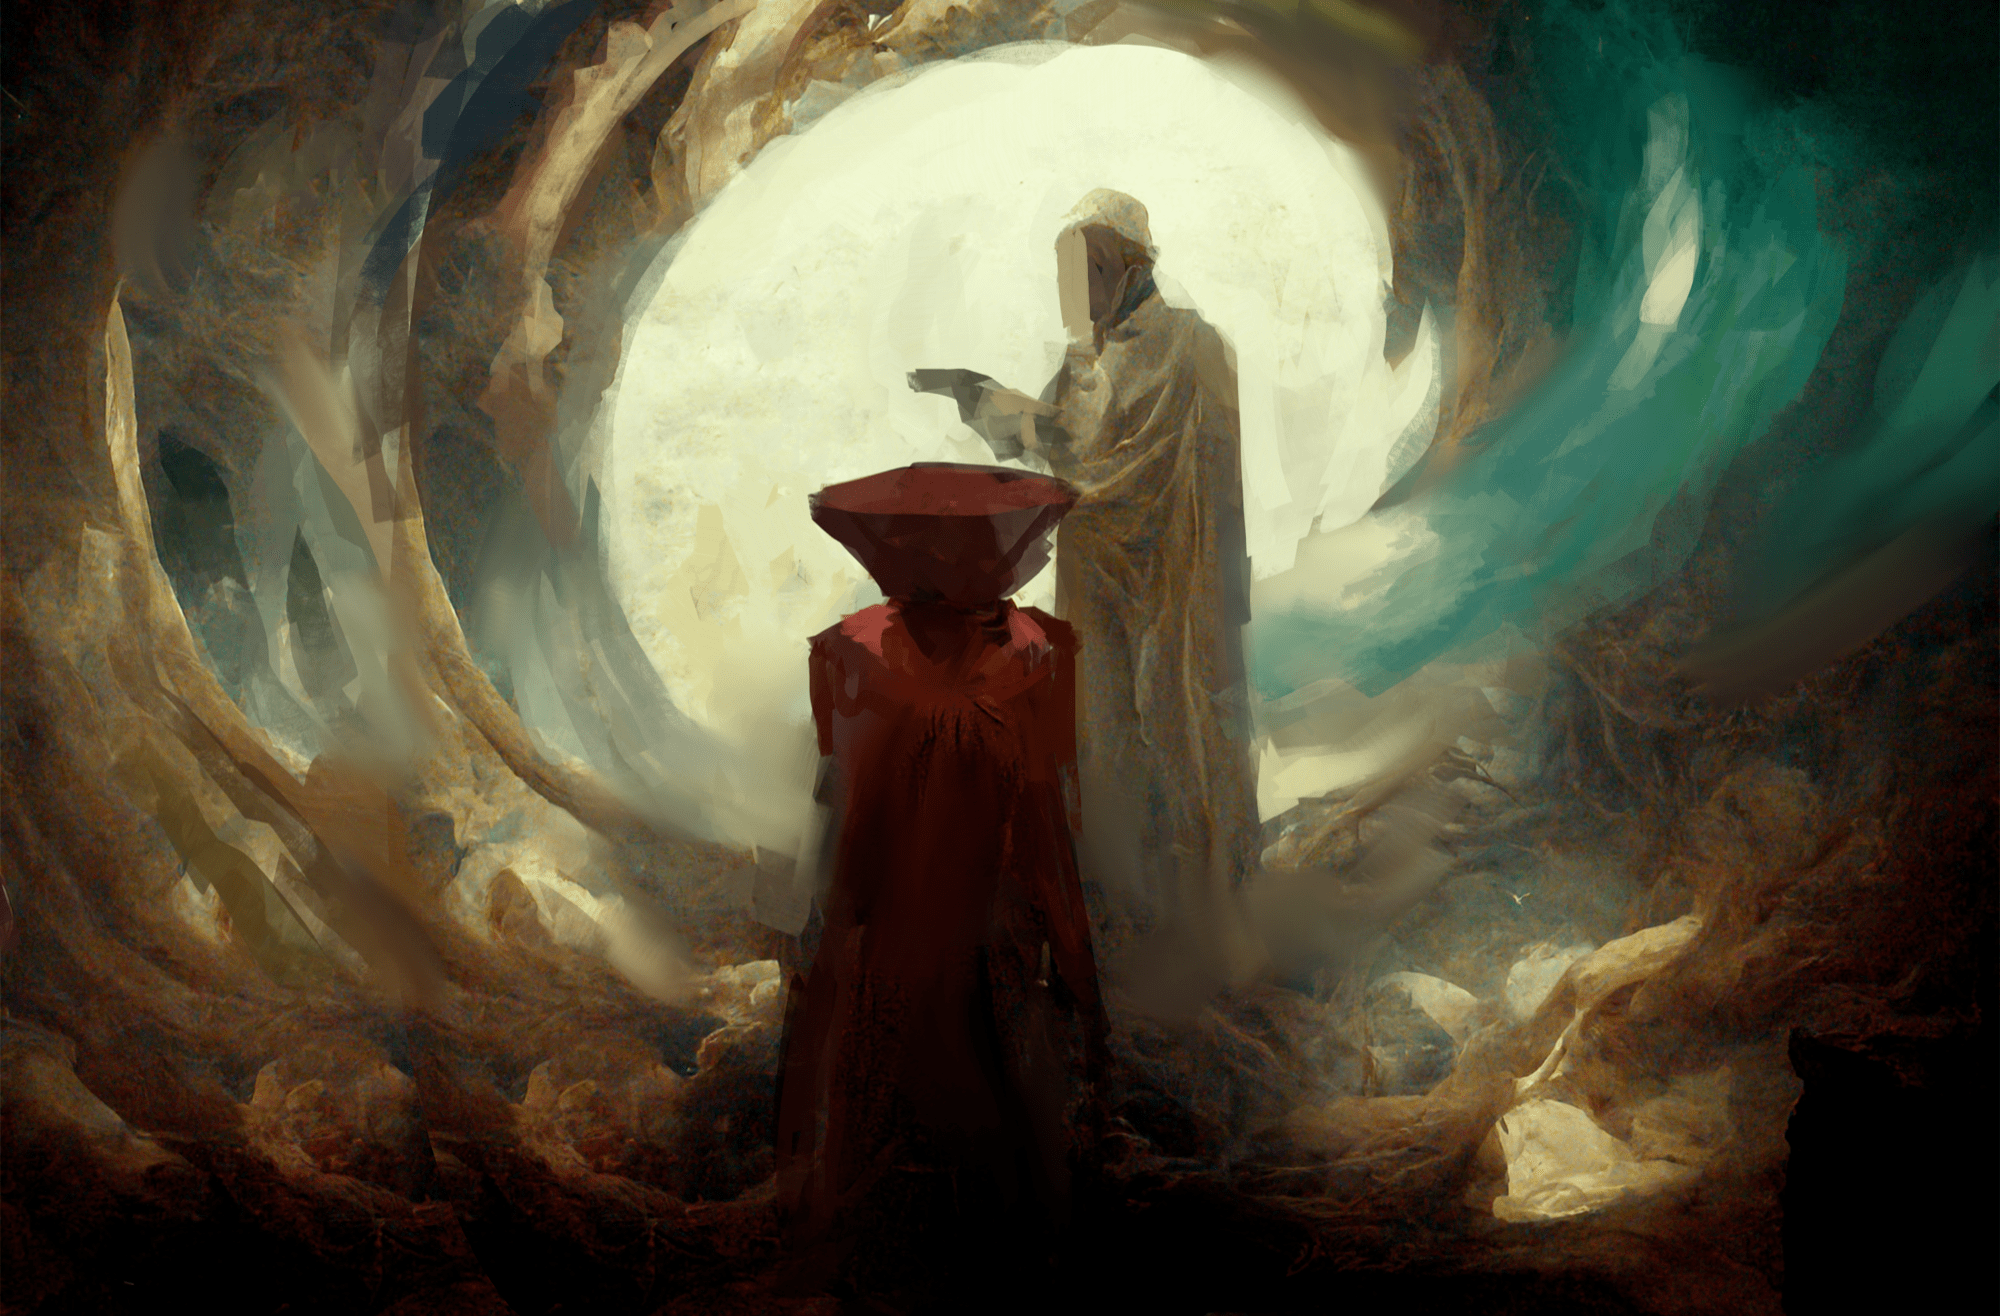 An oil painting of dark swirling clouds. At the center are two figures: one wearing a long dark cloak with a clerical hat with its back to the viewer. standing in front of the figure is a tall priestly looking figure wearing a white robe with its faced obscured, that towers over the central figure